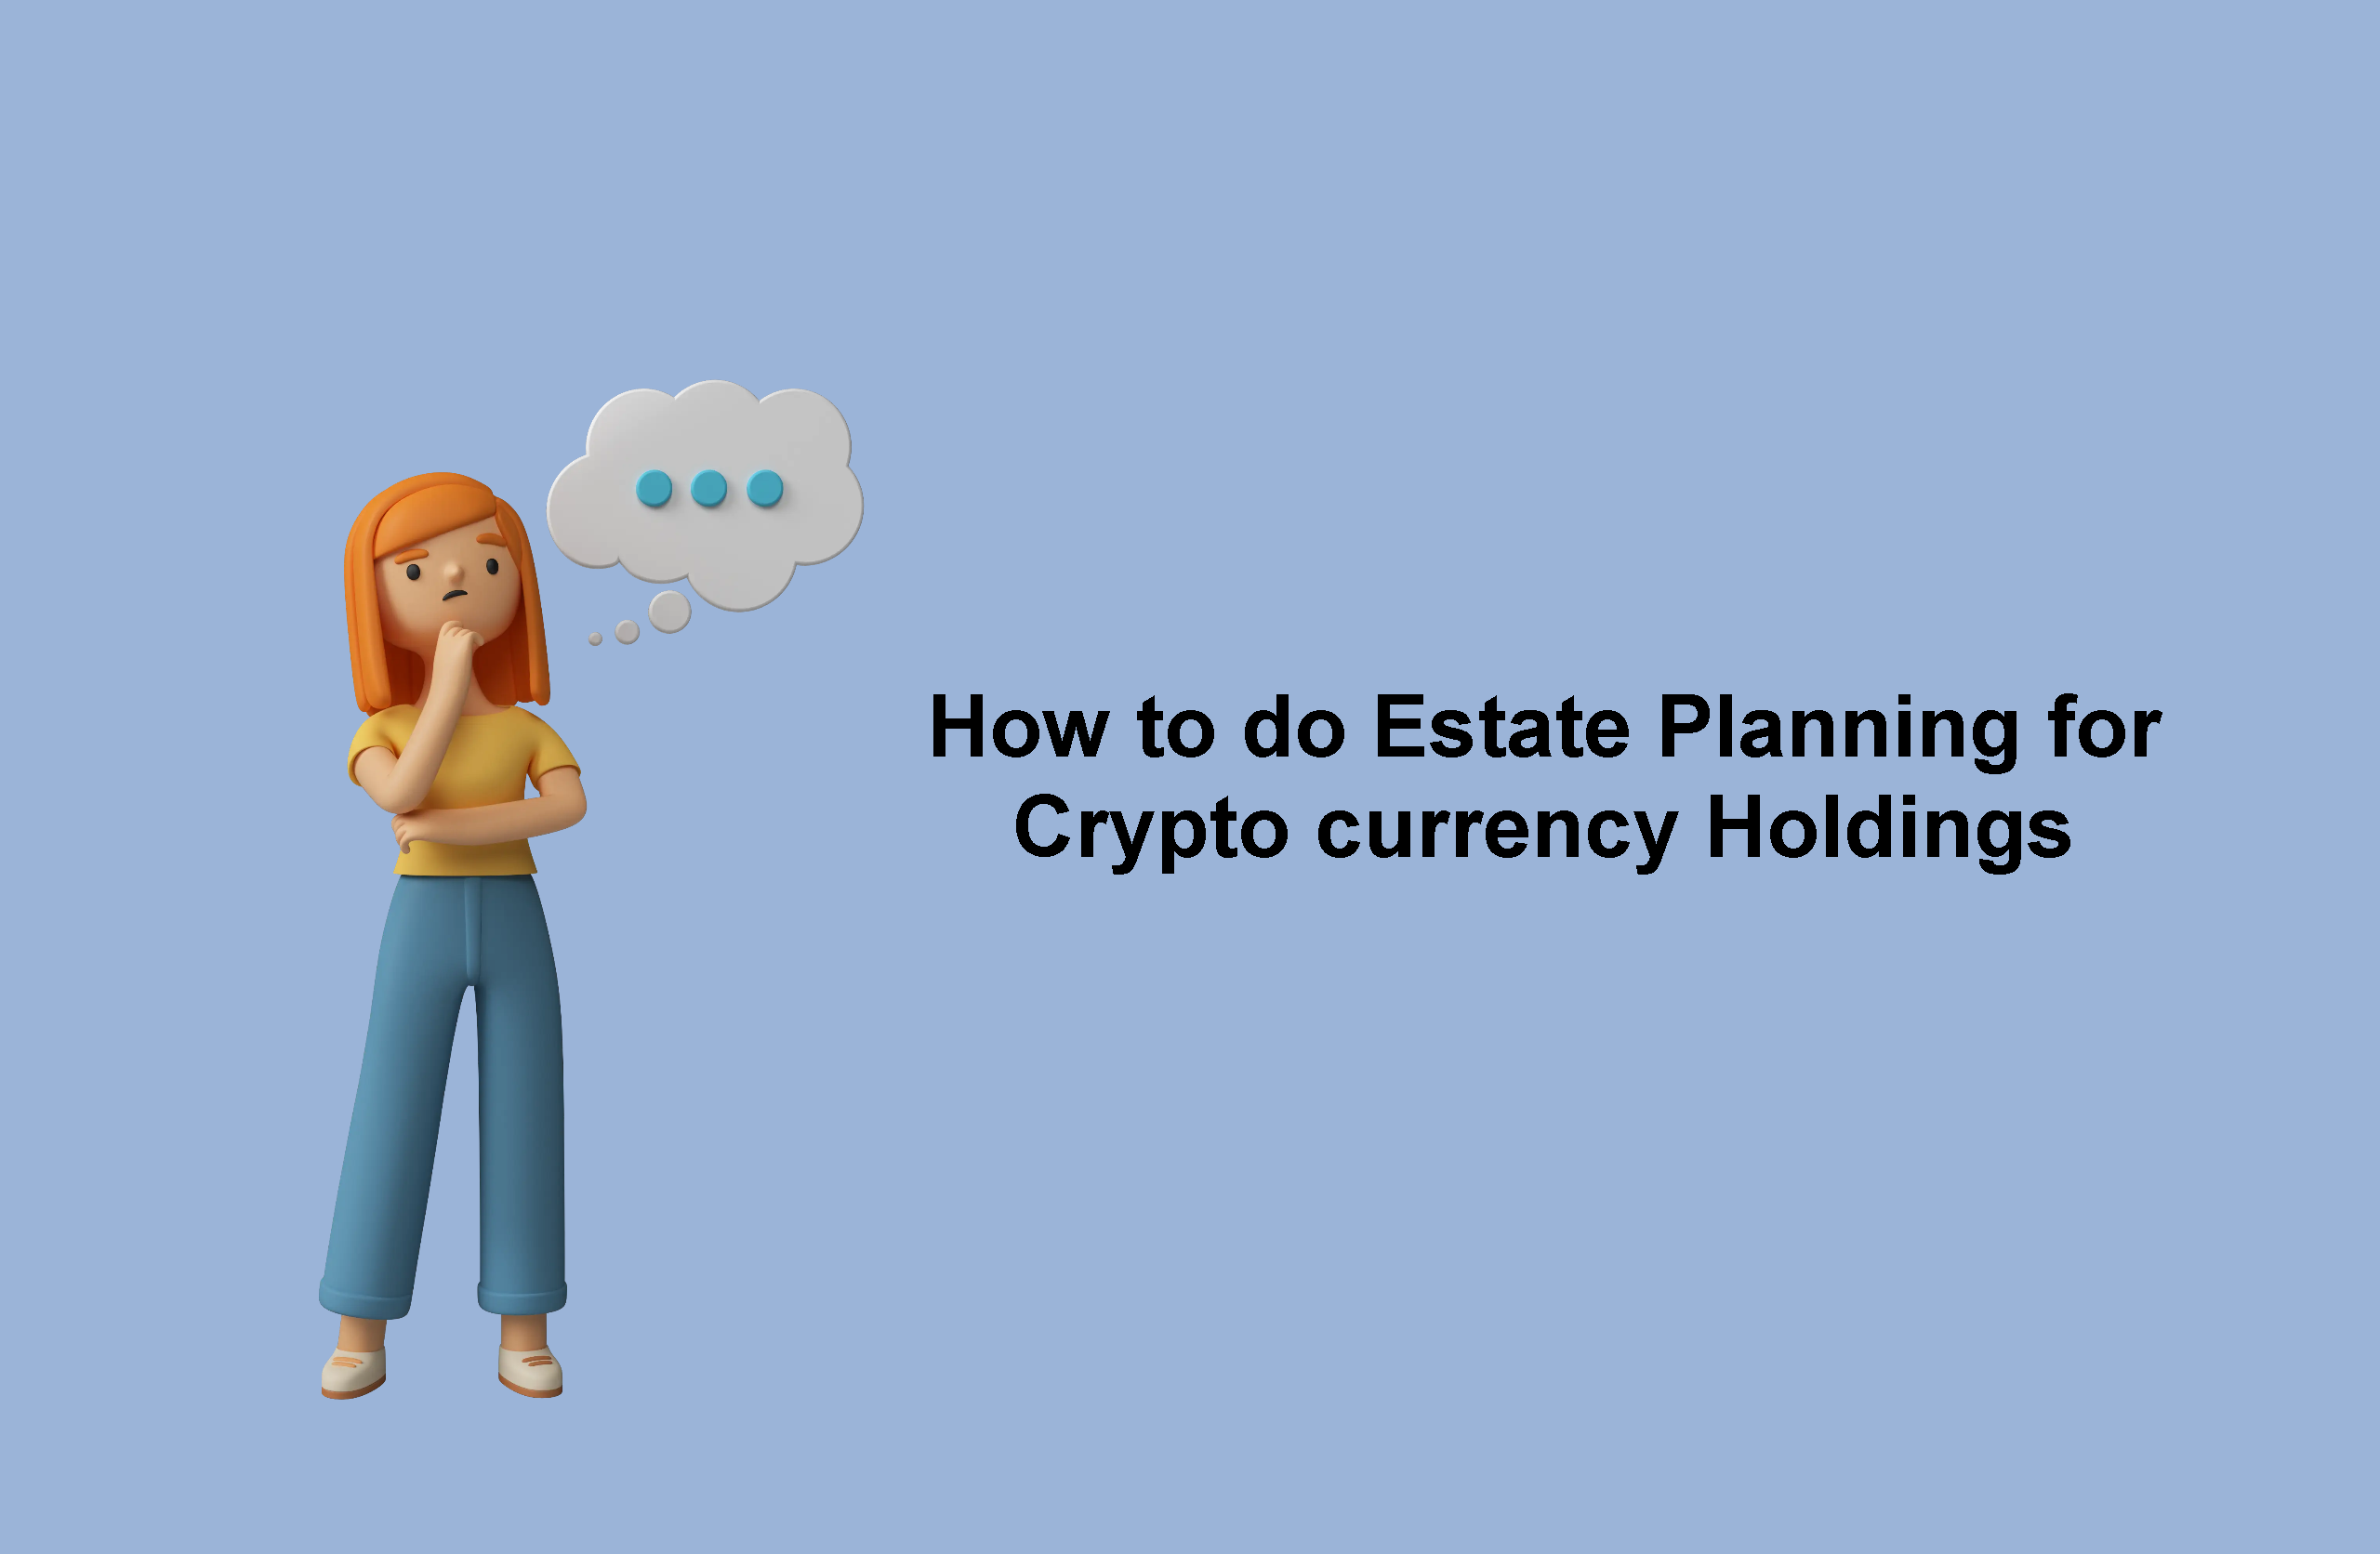 How to do Estate Planning for Cryptocurrency